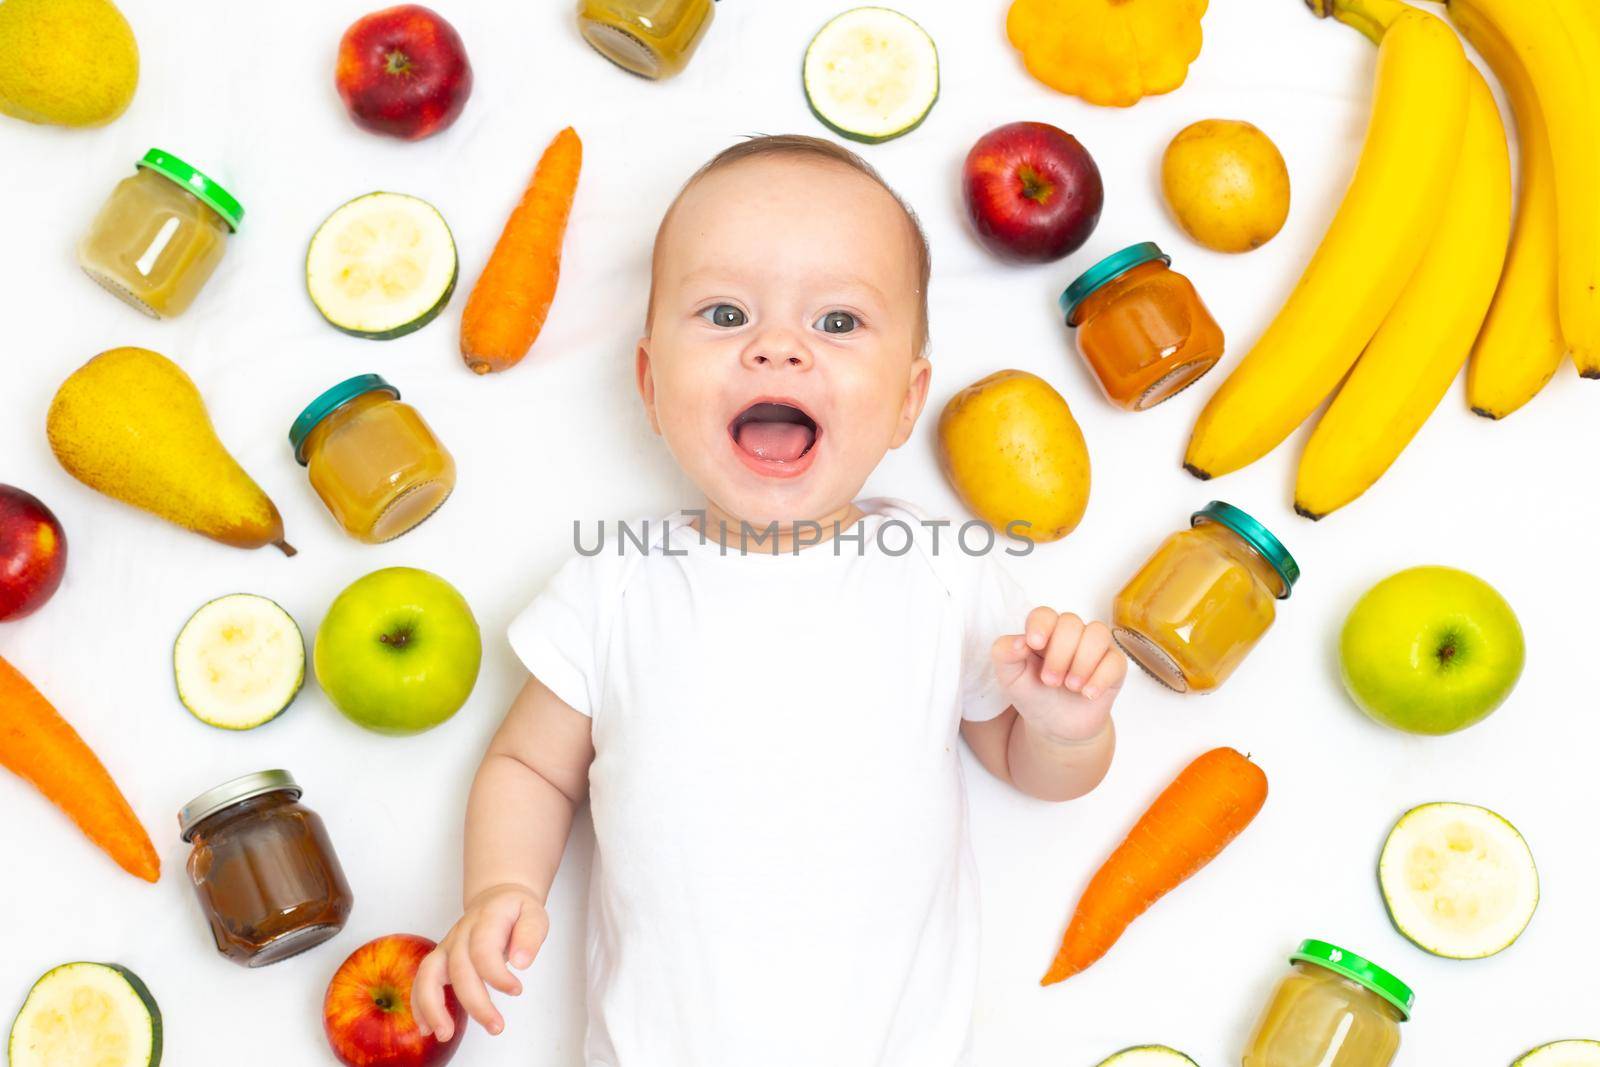 Puree for baby food with vegetables and fruits. Selective focus. nutrition. The first complementary feeding of the child. by alenka2194